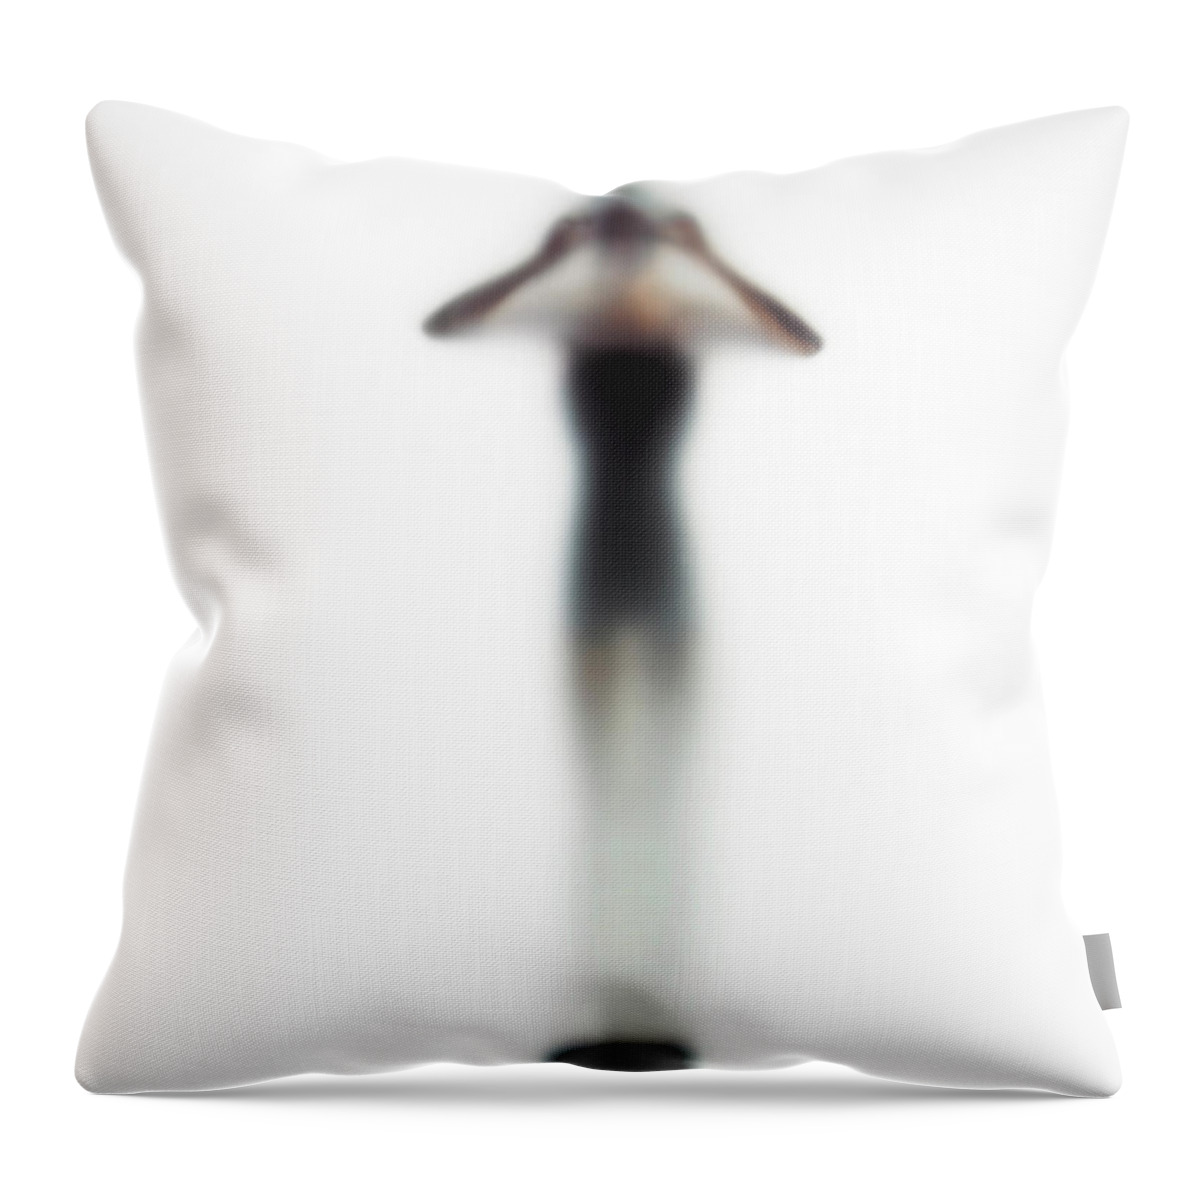 Diving Into Water Throw Pillow featuring the photograph Female Swimmer Adjusting Goggles by Symphonie